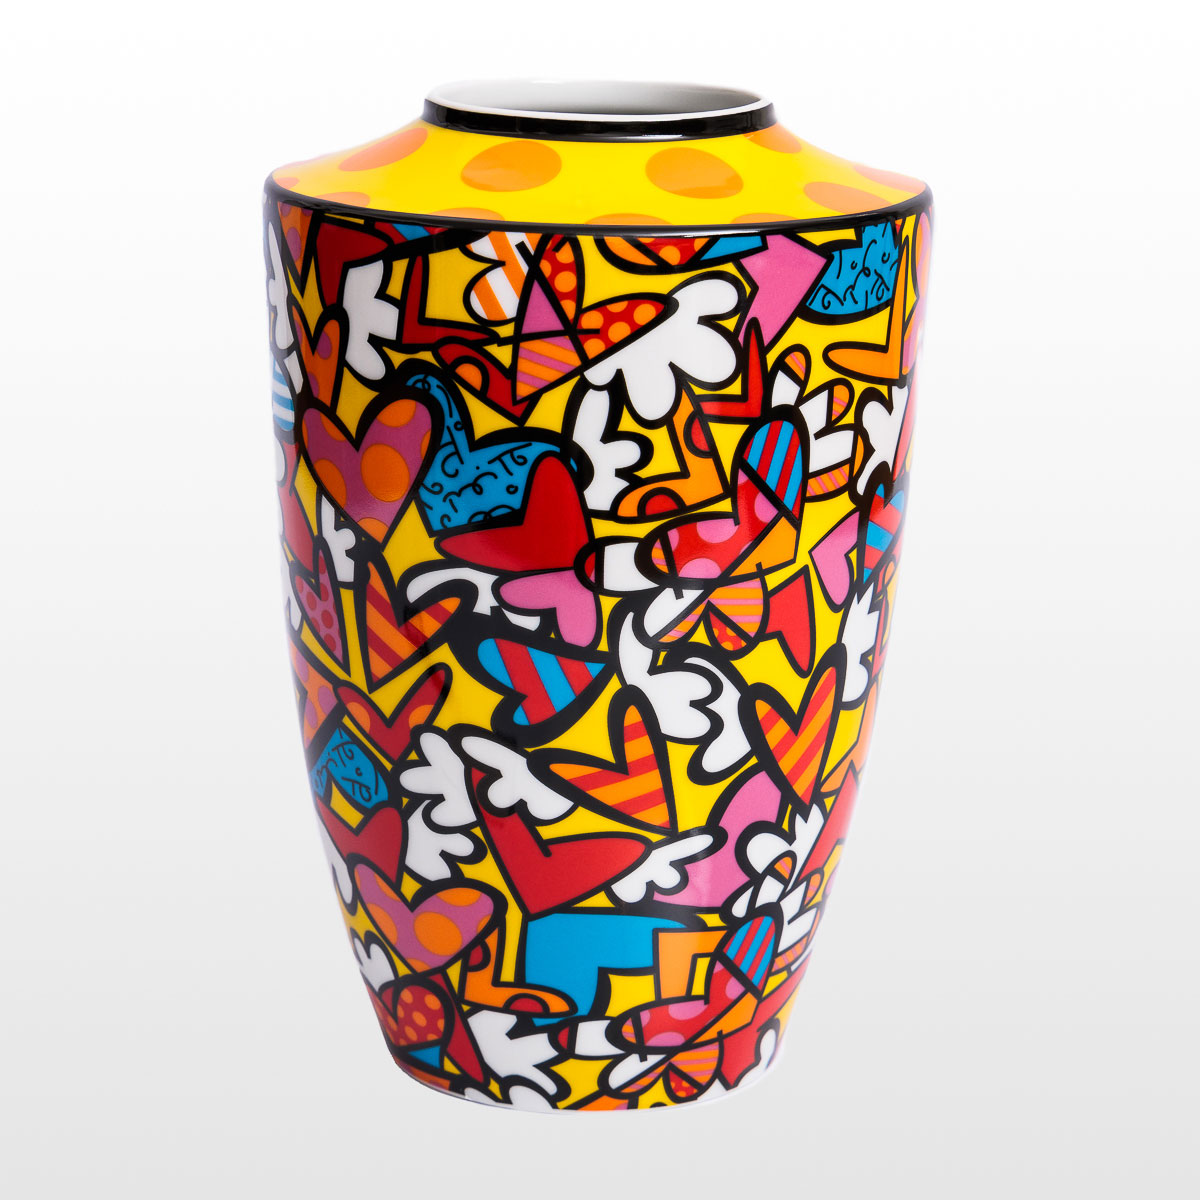 Romero Britto vase : All we need is love (detail 3)